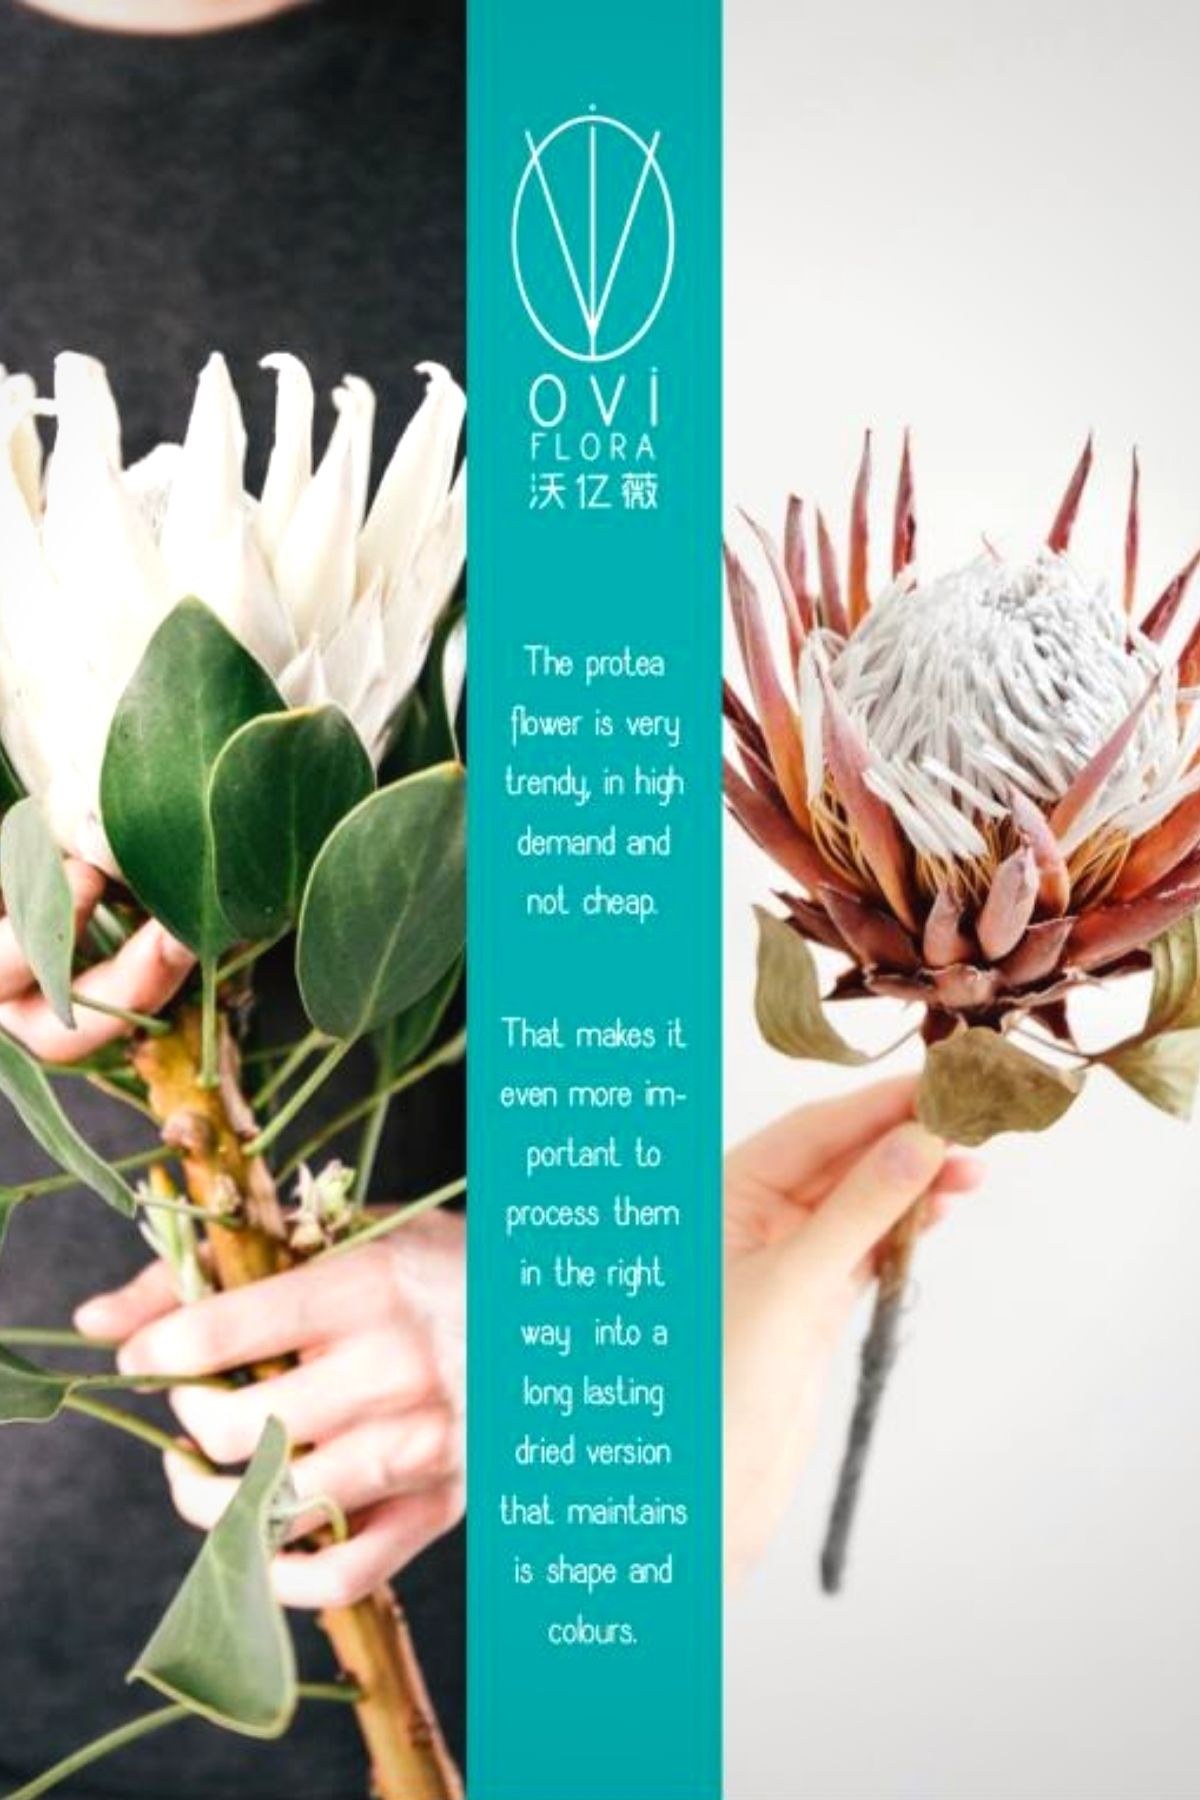 OVIflora Has a Huge Demand for Preserved and Dried Flowers in China - Article on Thursd (3)